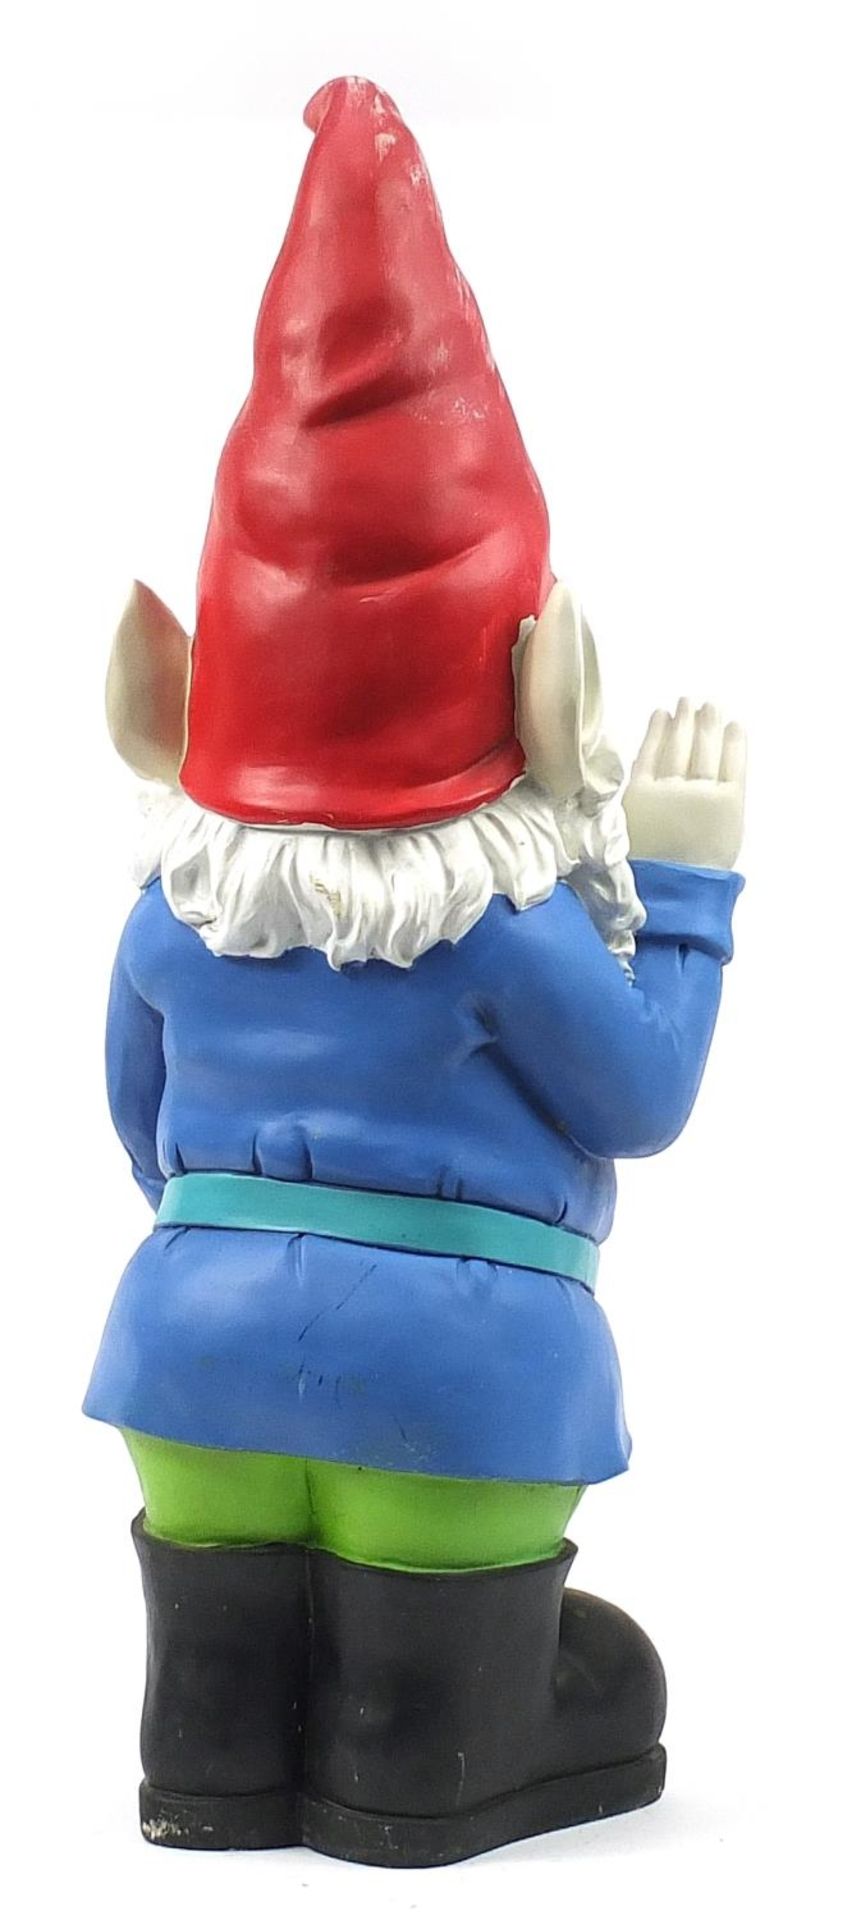 Large garden gnome ornament, 94cm high - Image 2 of 3